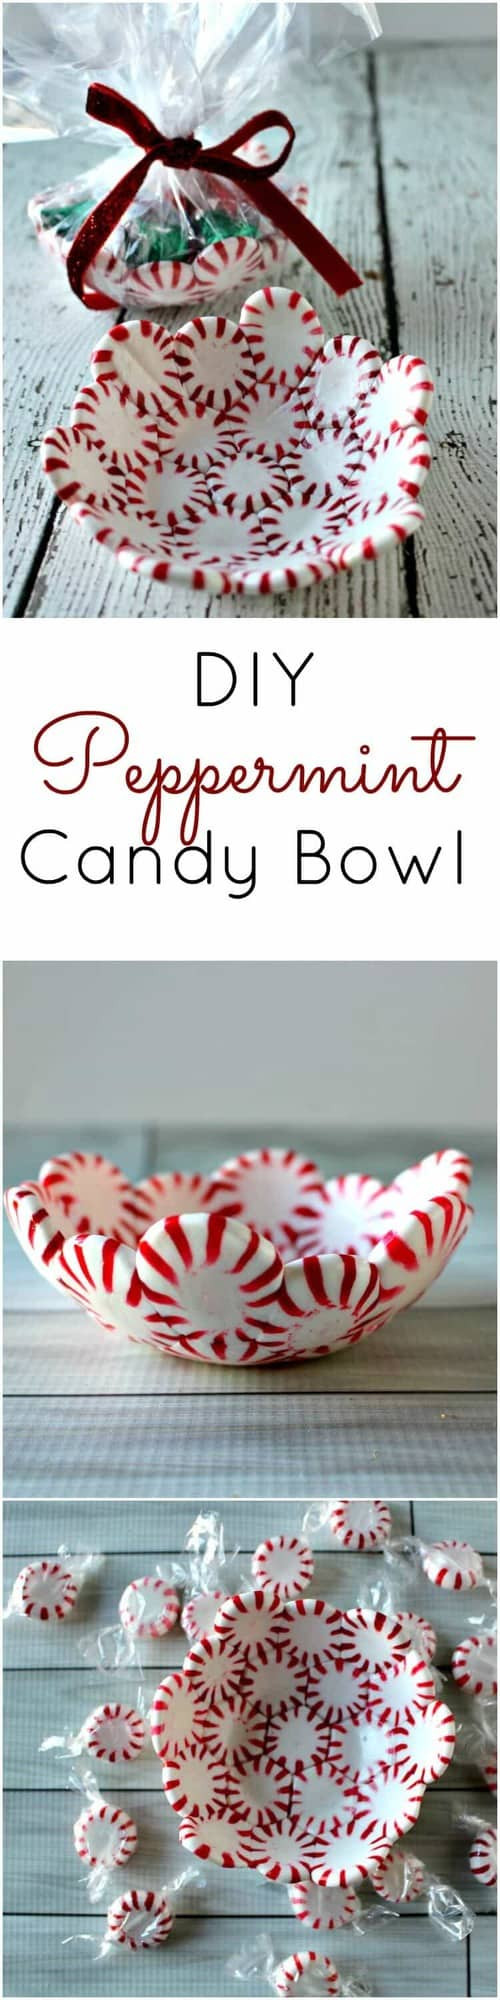 Candy DIY Gifts
 DIY Peppermint Candy Bowls Princess Pinky Girl